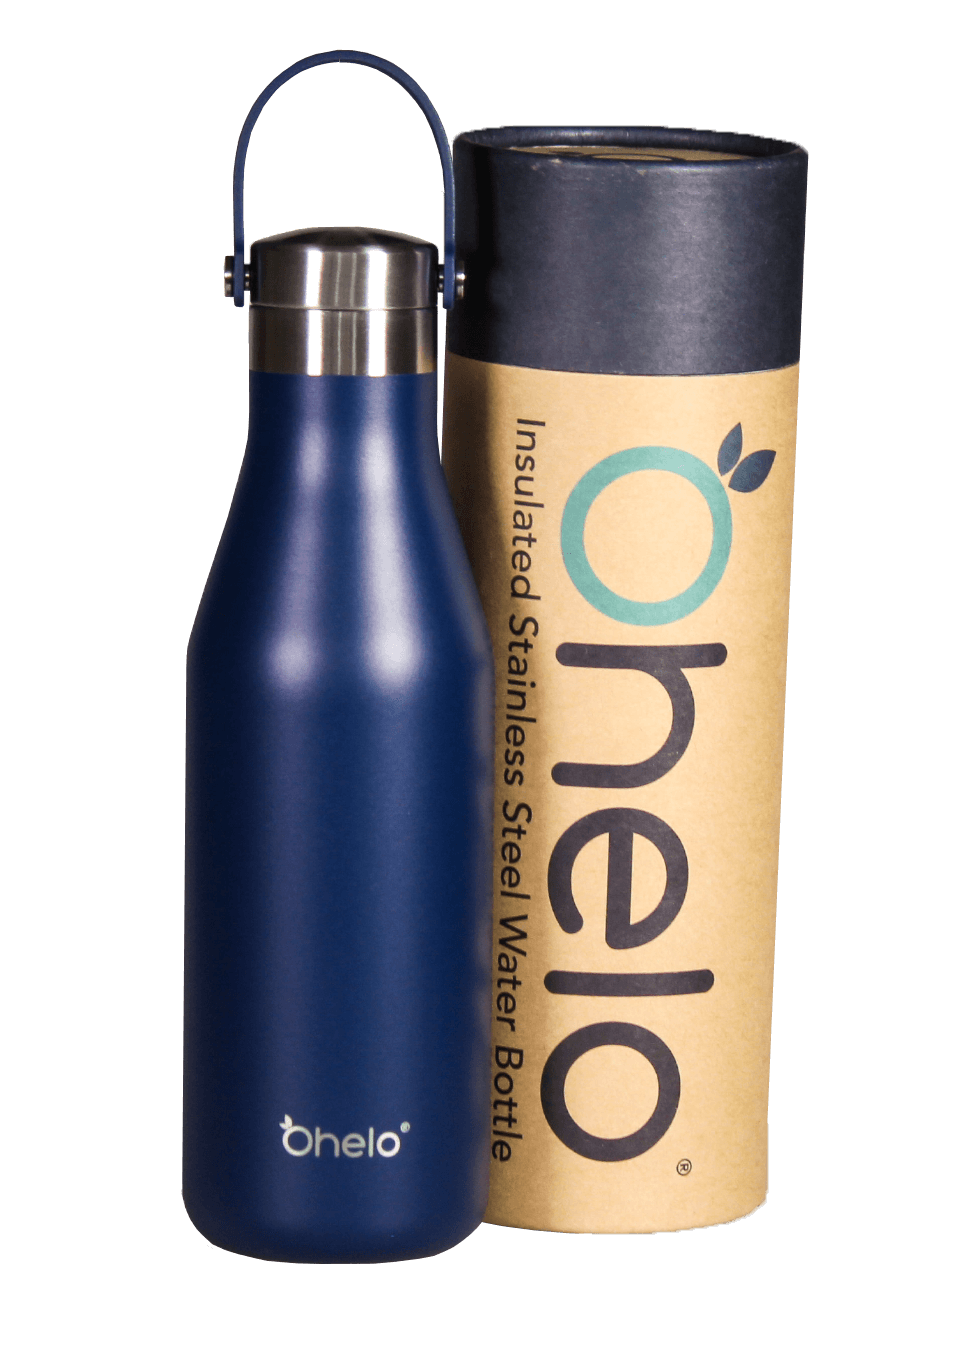 Ohelo dark blue insulated water bottle with recycled packaging